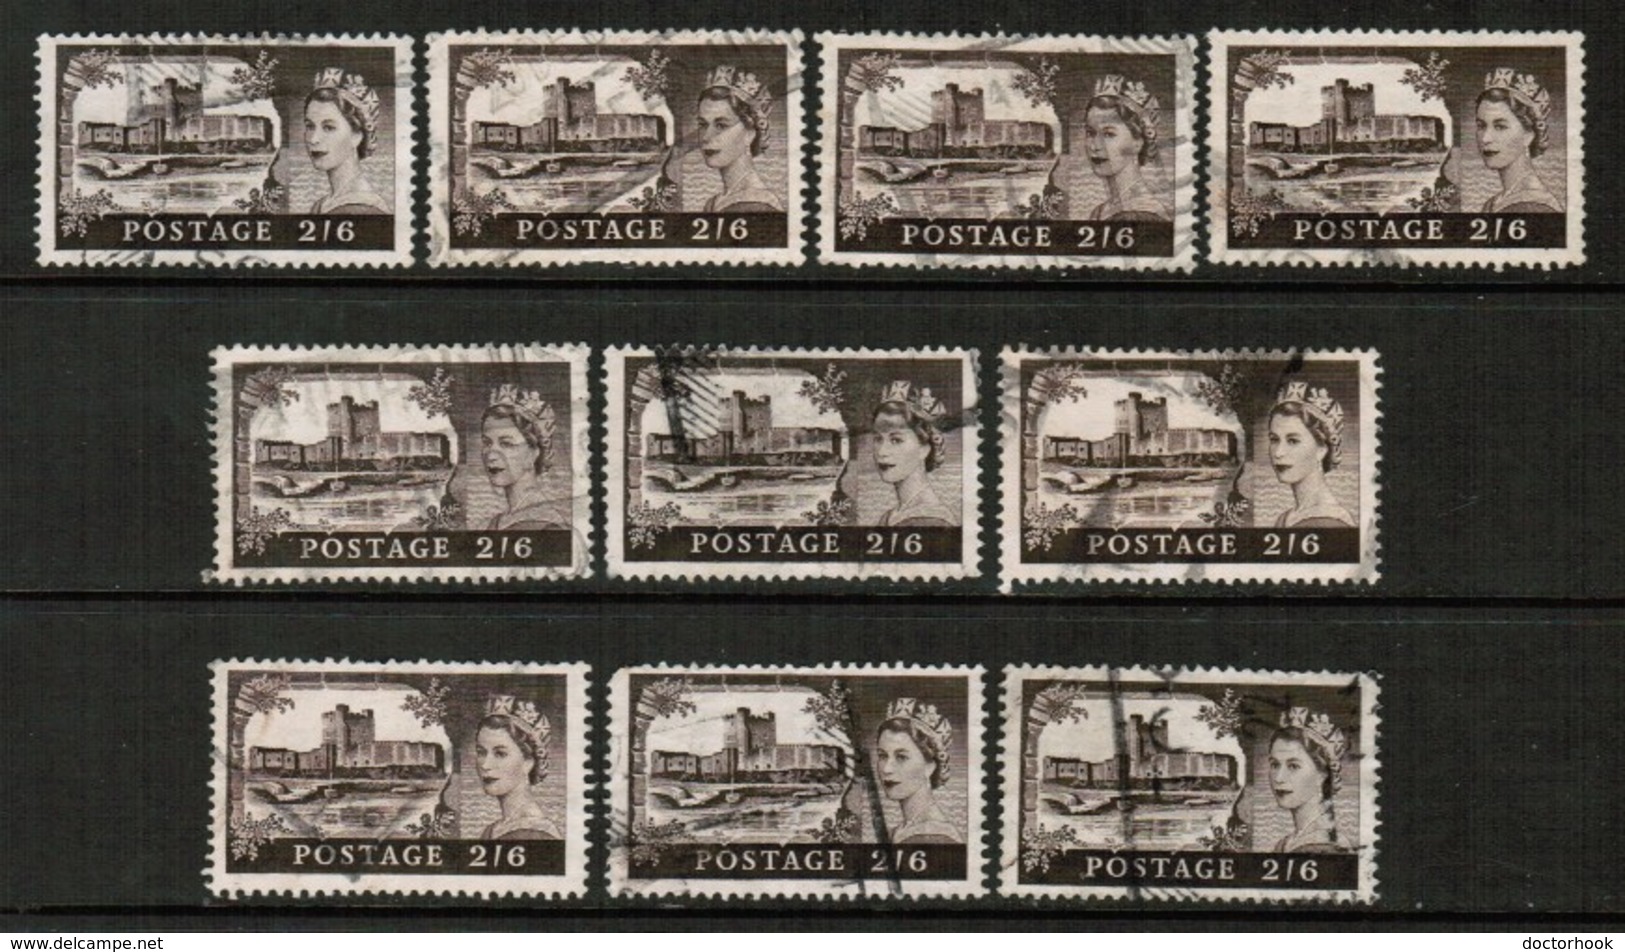 GREAT BRITAIN  Scott # 309 USED WHOLESALE LOT OF 10 (WH-276) - Lots & Kiloware (mixtures) - Max. 999 Stamps